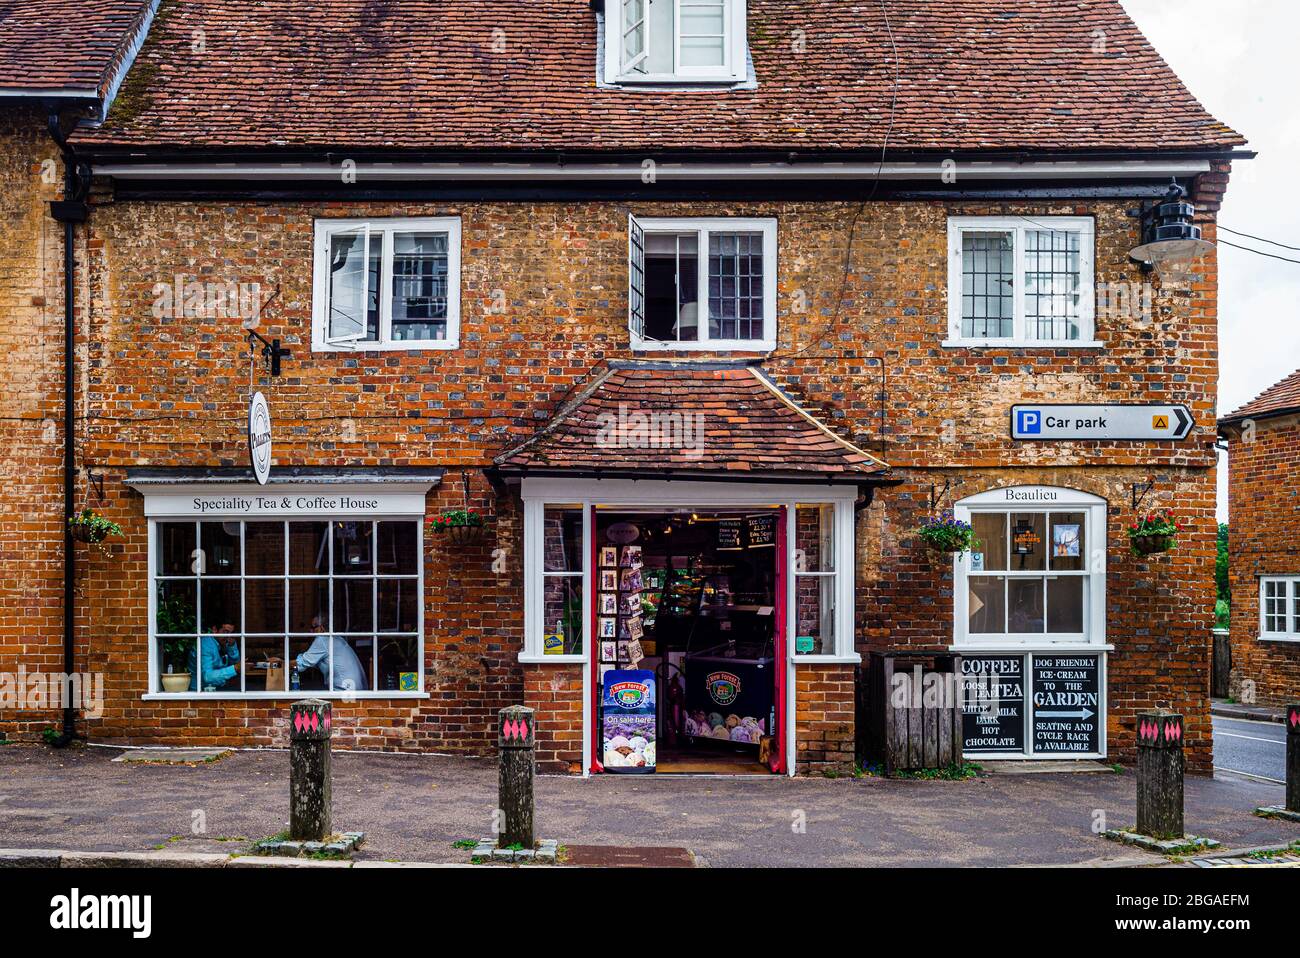 Pallets Tea and Coffee House in the High Street, Beaulieu, Hampshire, England. Stock Photo